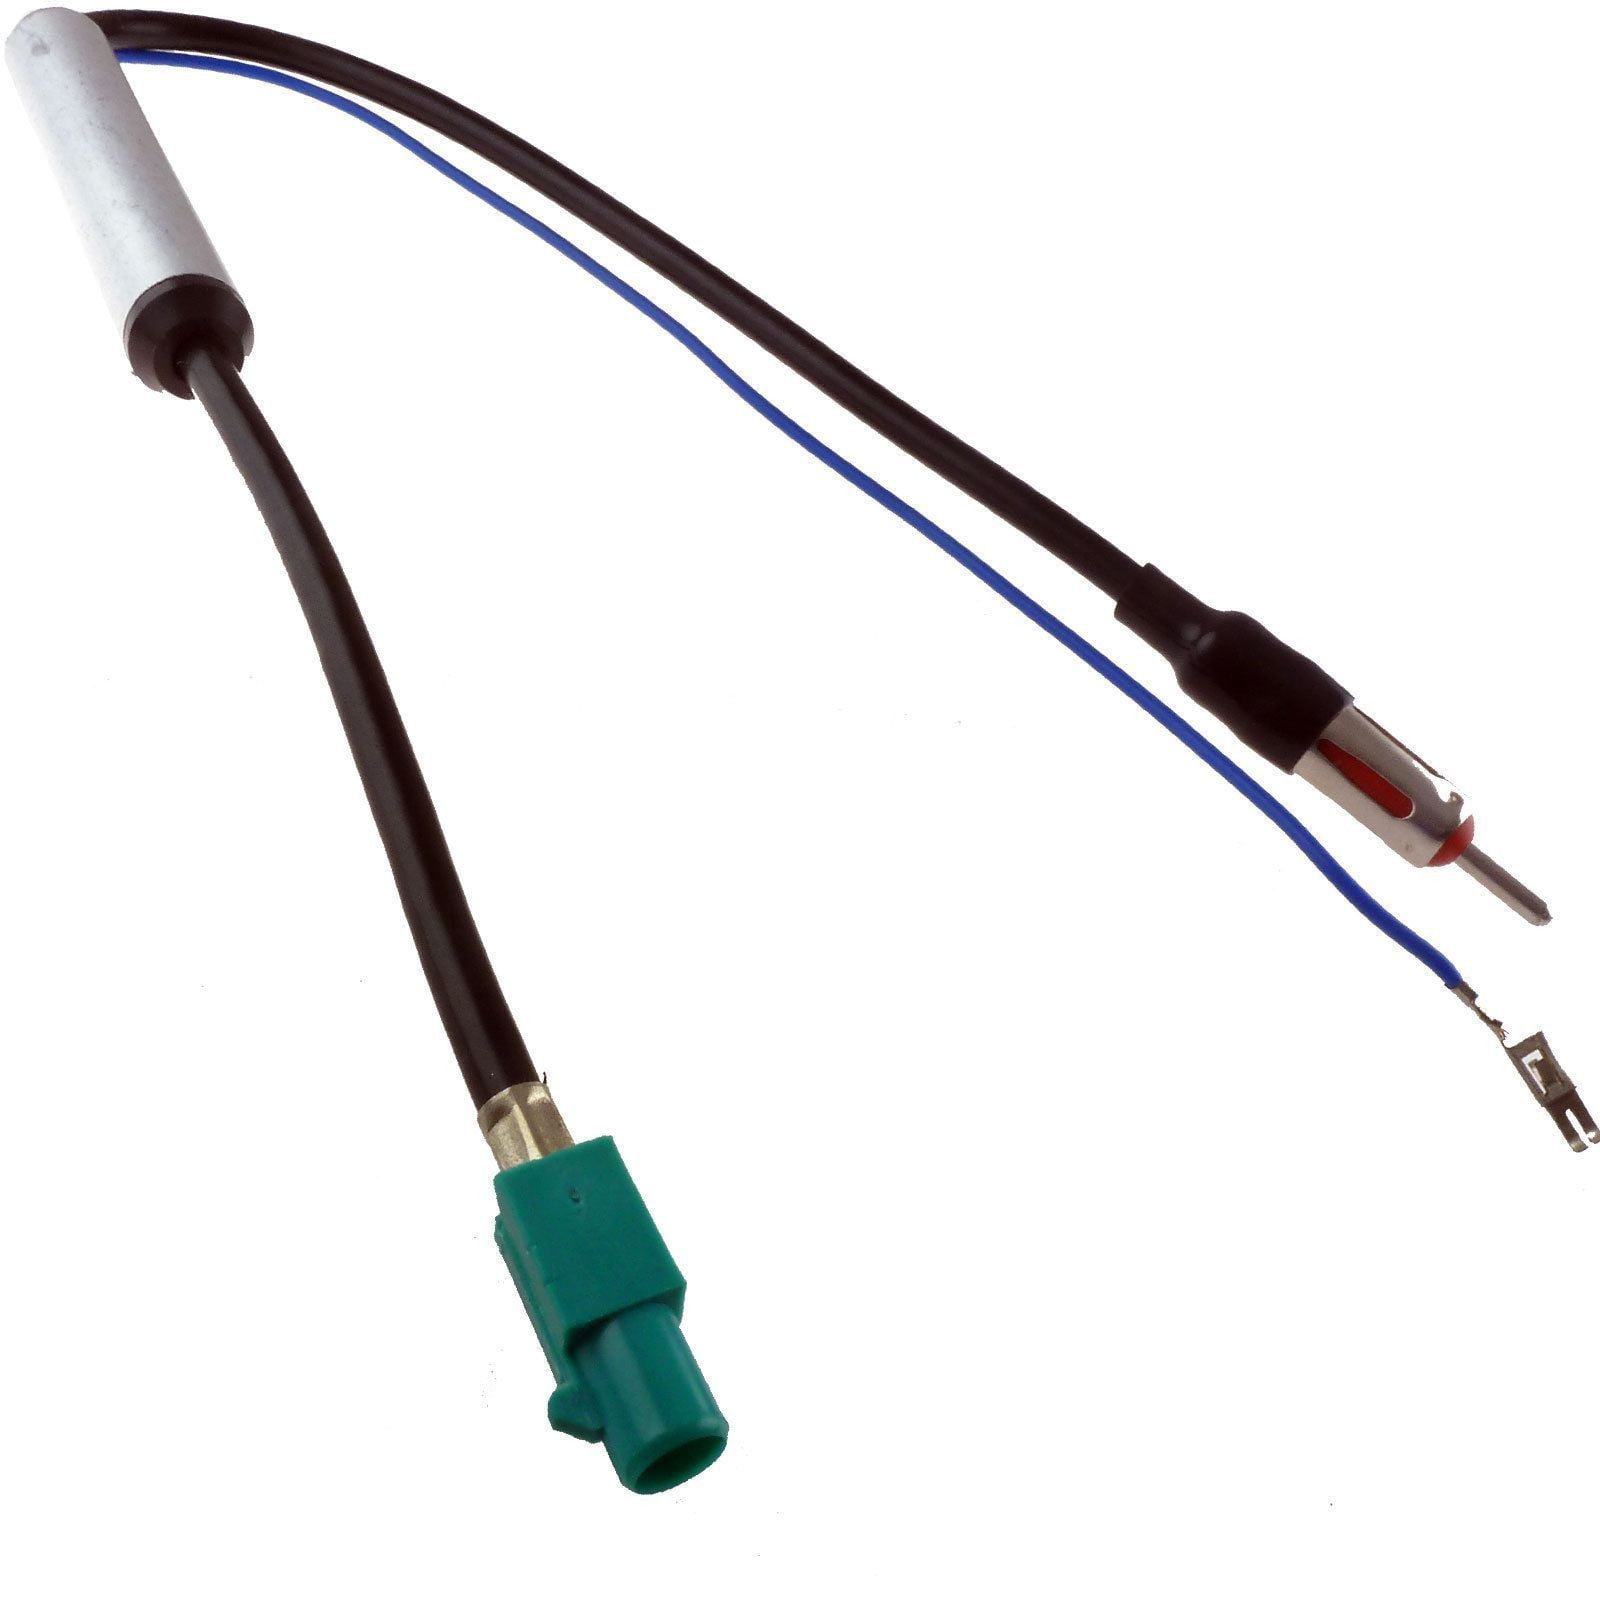 2014 2012 Cruze 2011 Stereo Antenna Harness Adapter for Installing a New Radio Into a Chevrolet 2015 2013 